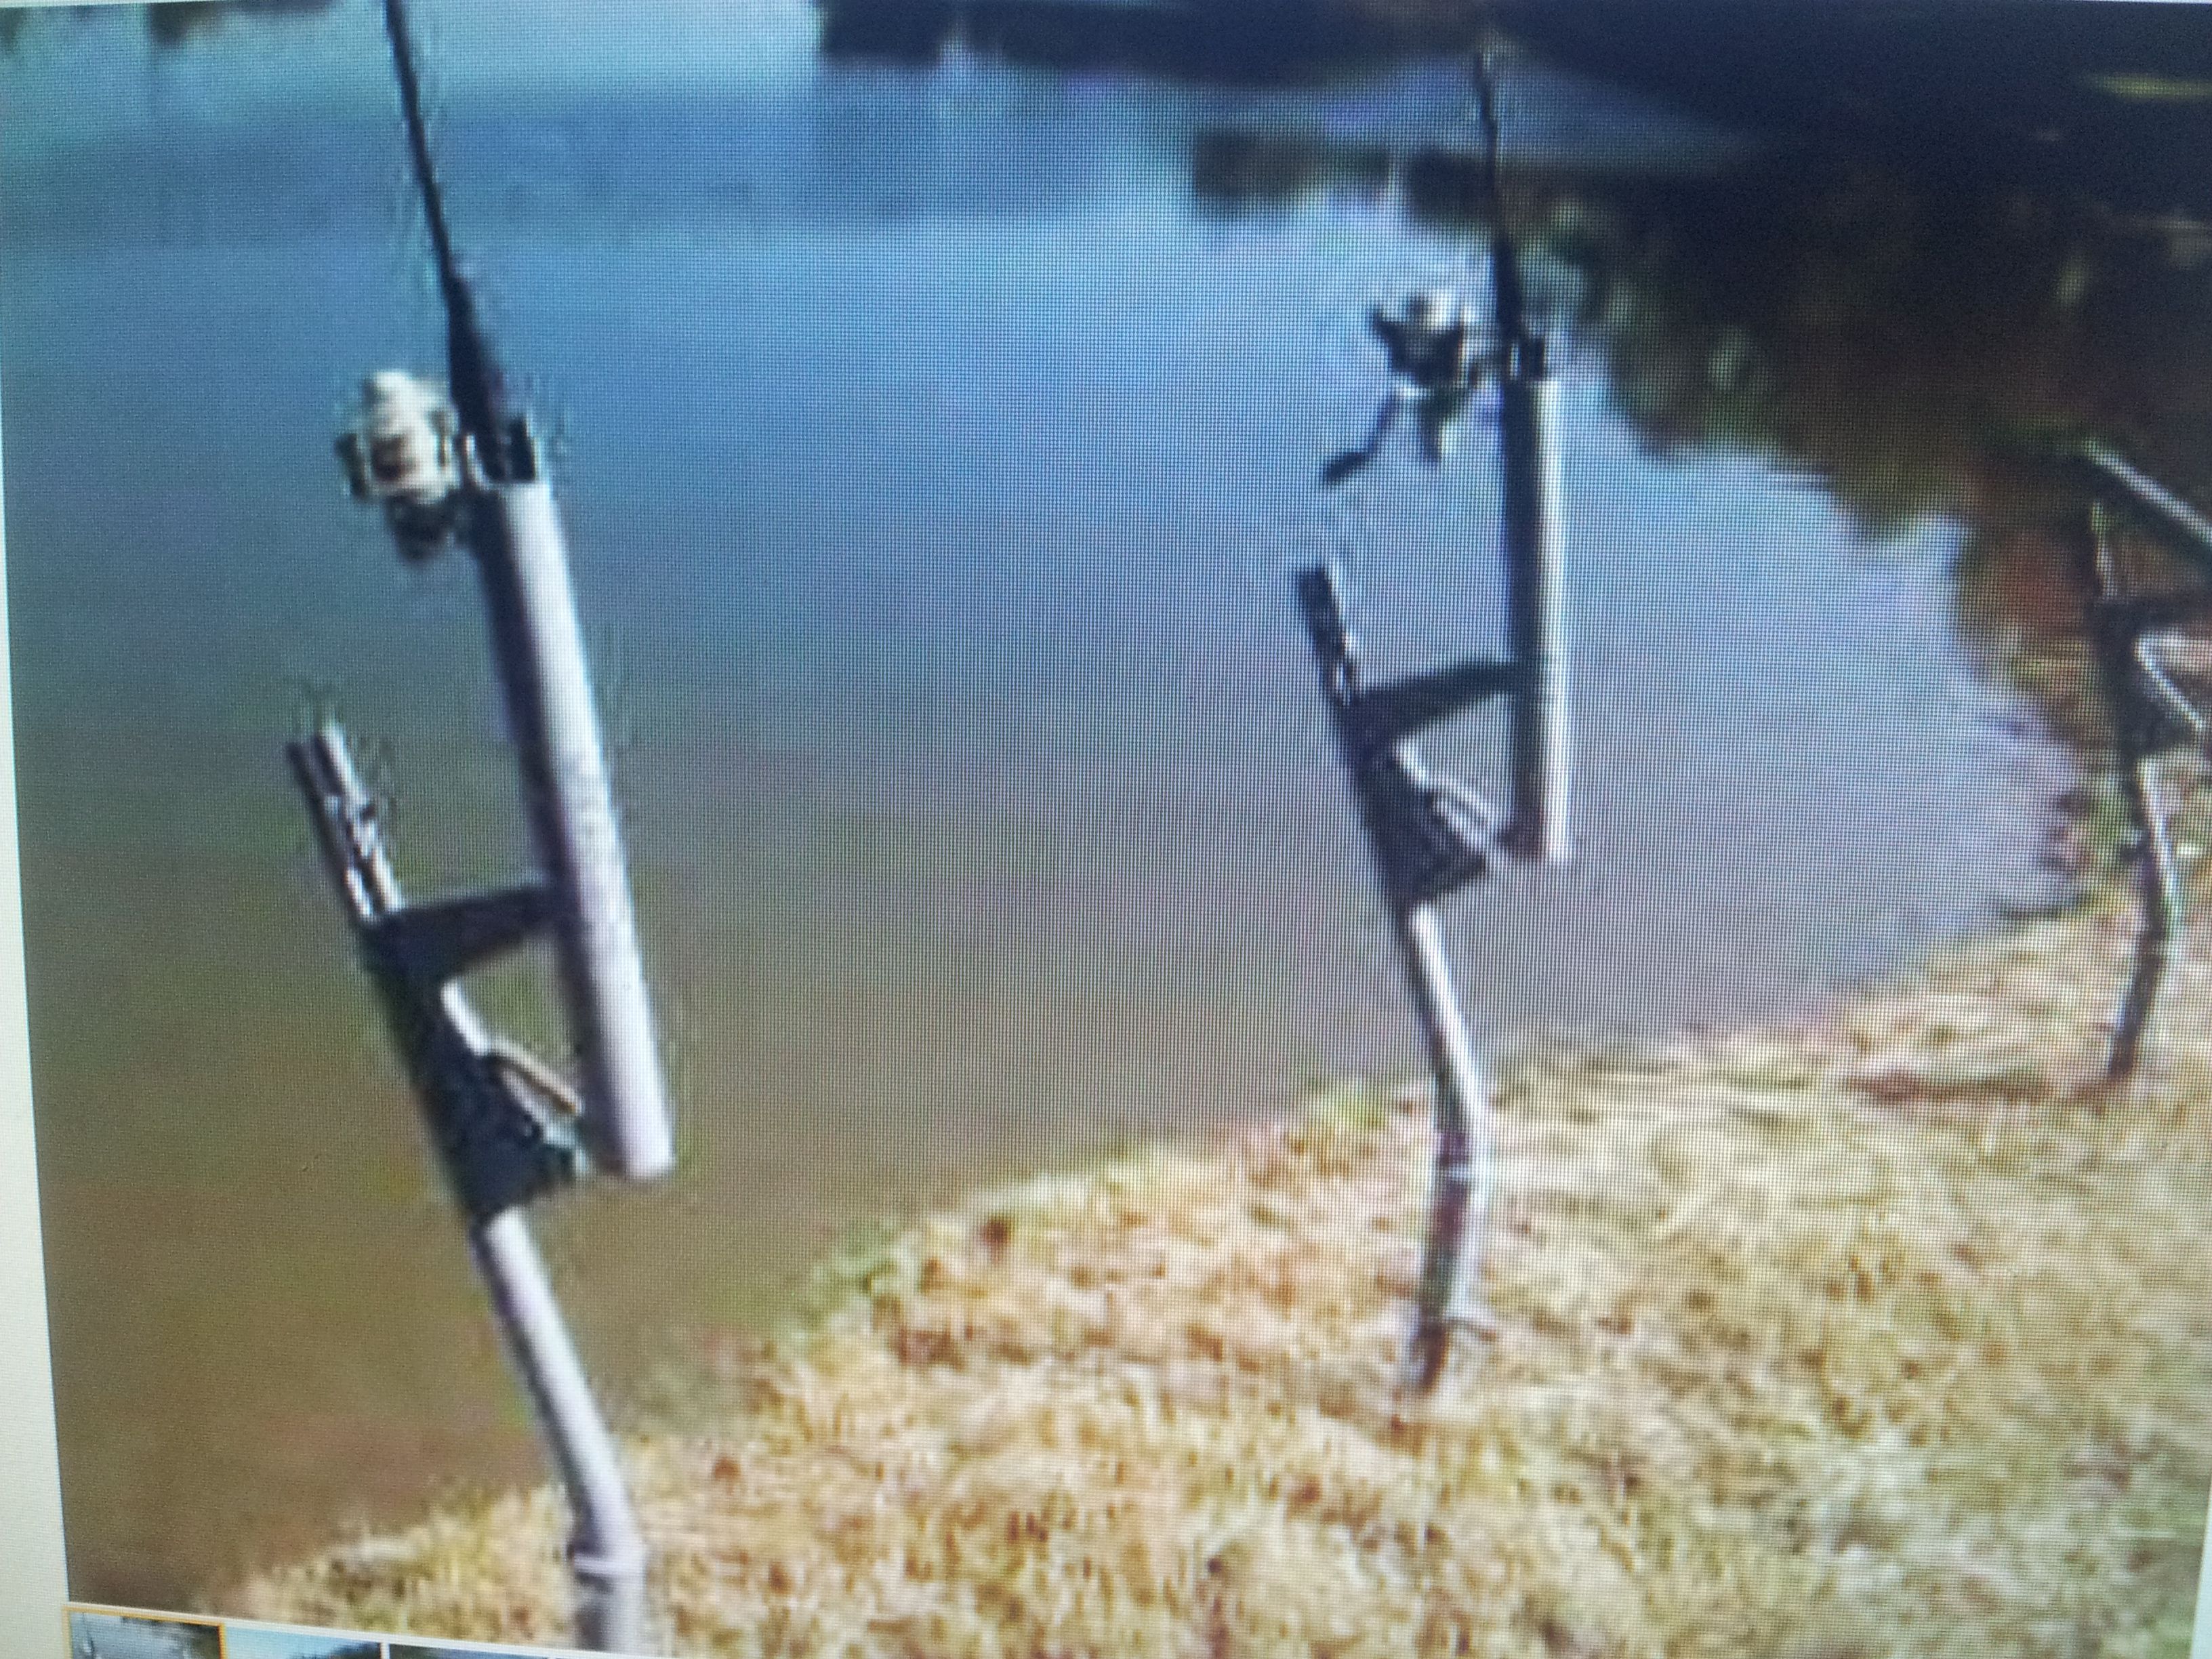 New Hooker automatic fish hooking rod holders